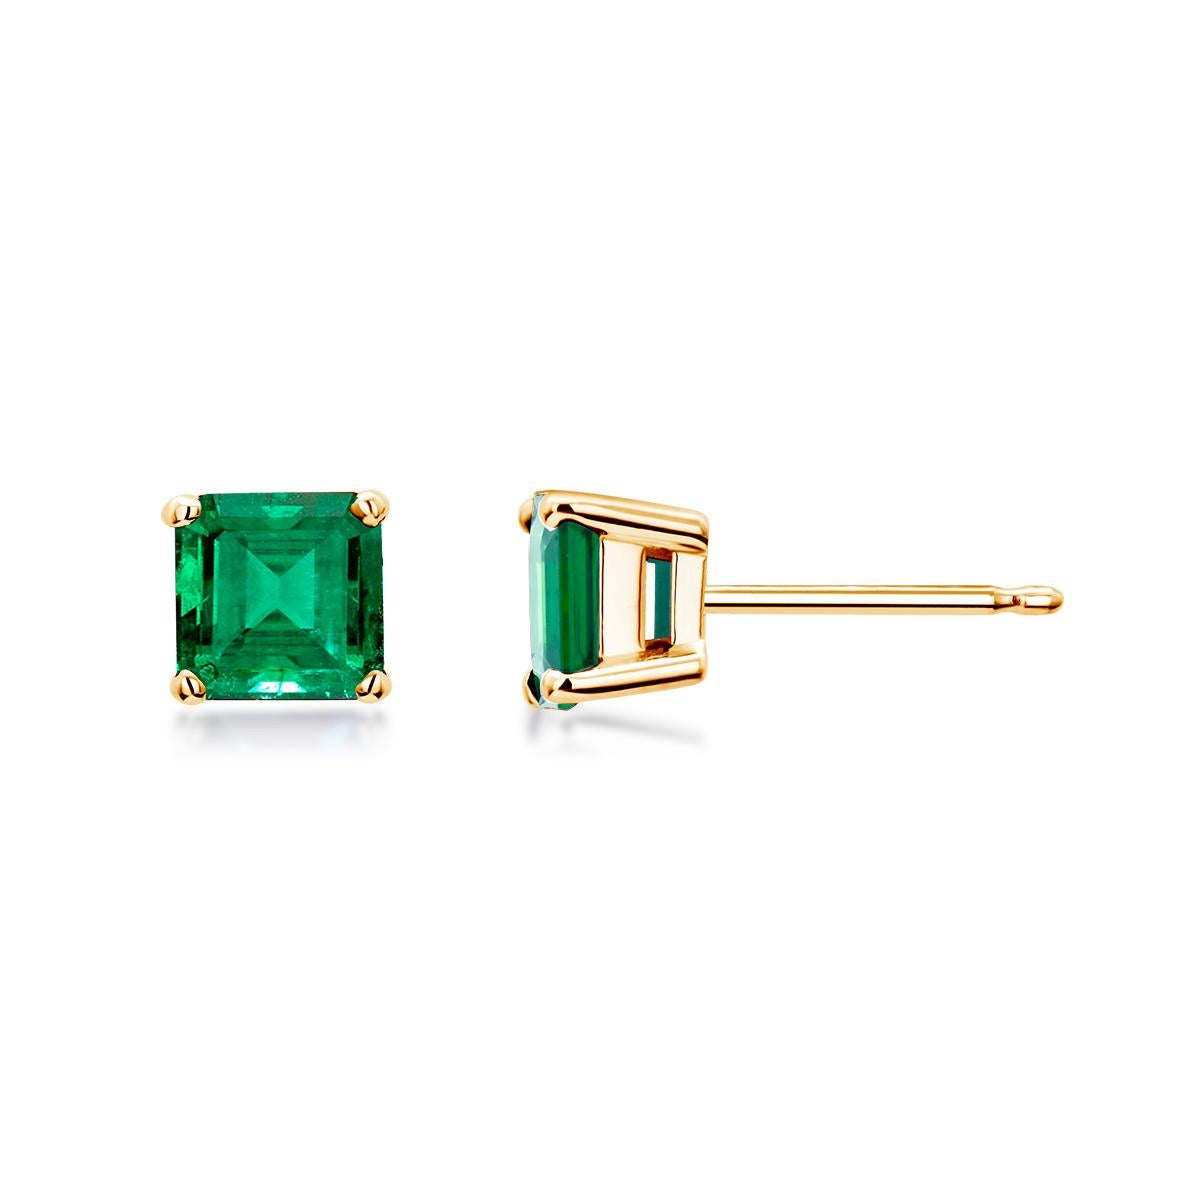 Emerald Cut Colombia Emerald Yellow Gold Stud Earrings Weighing 0.75 Carat 2